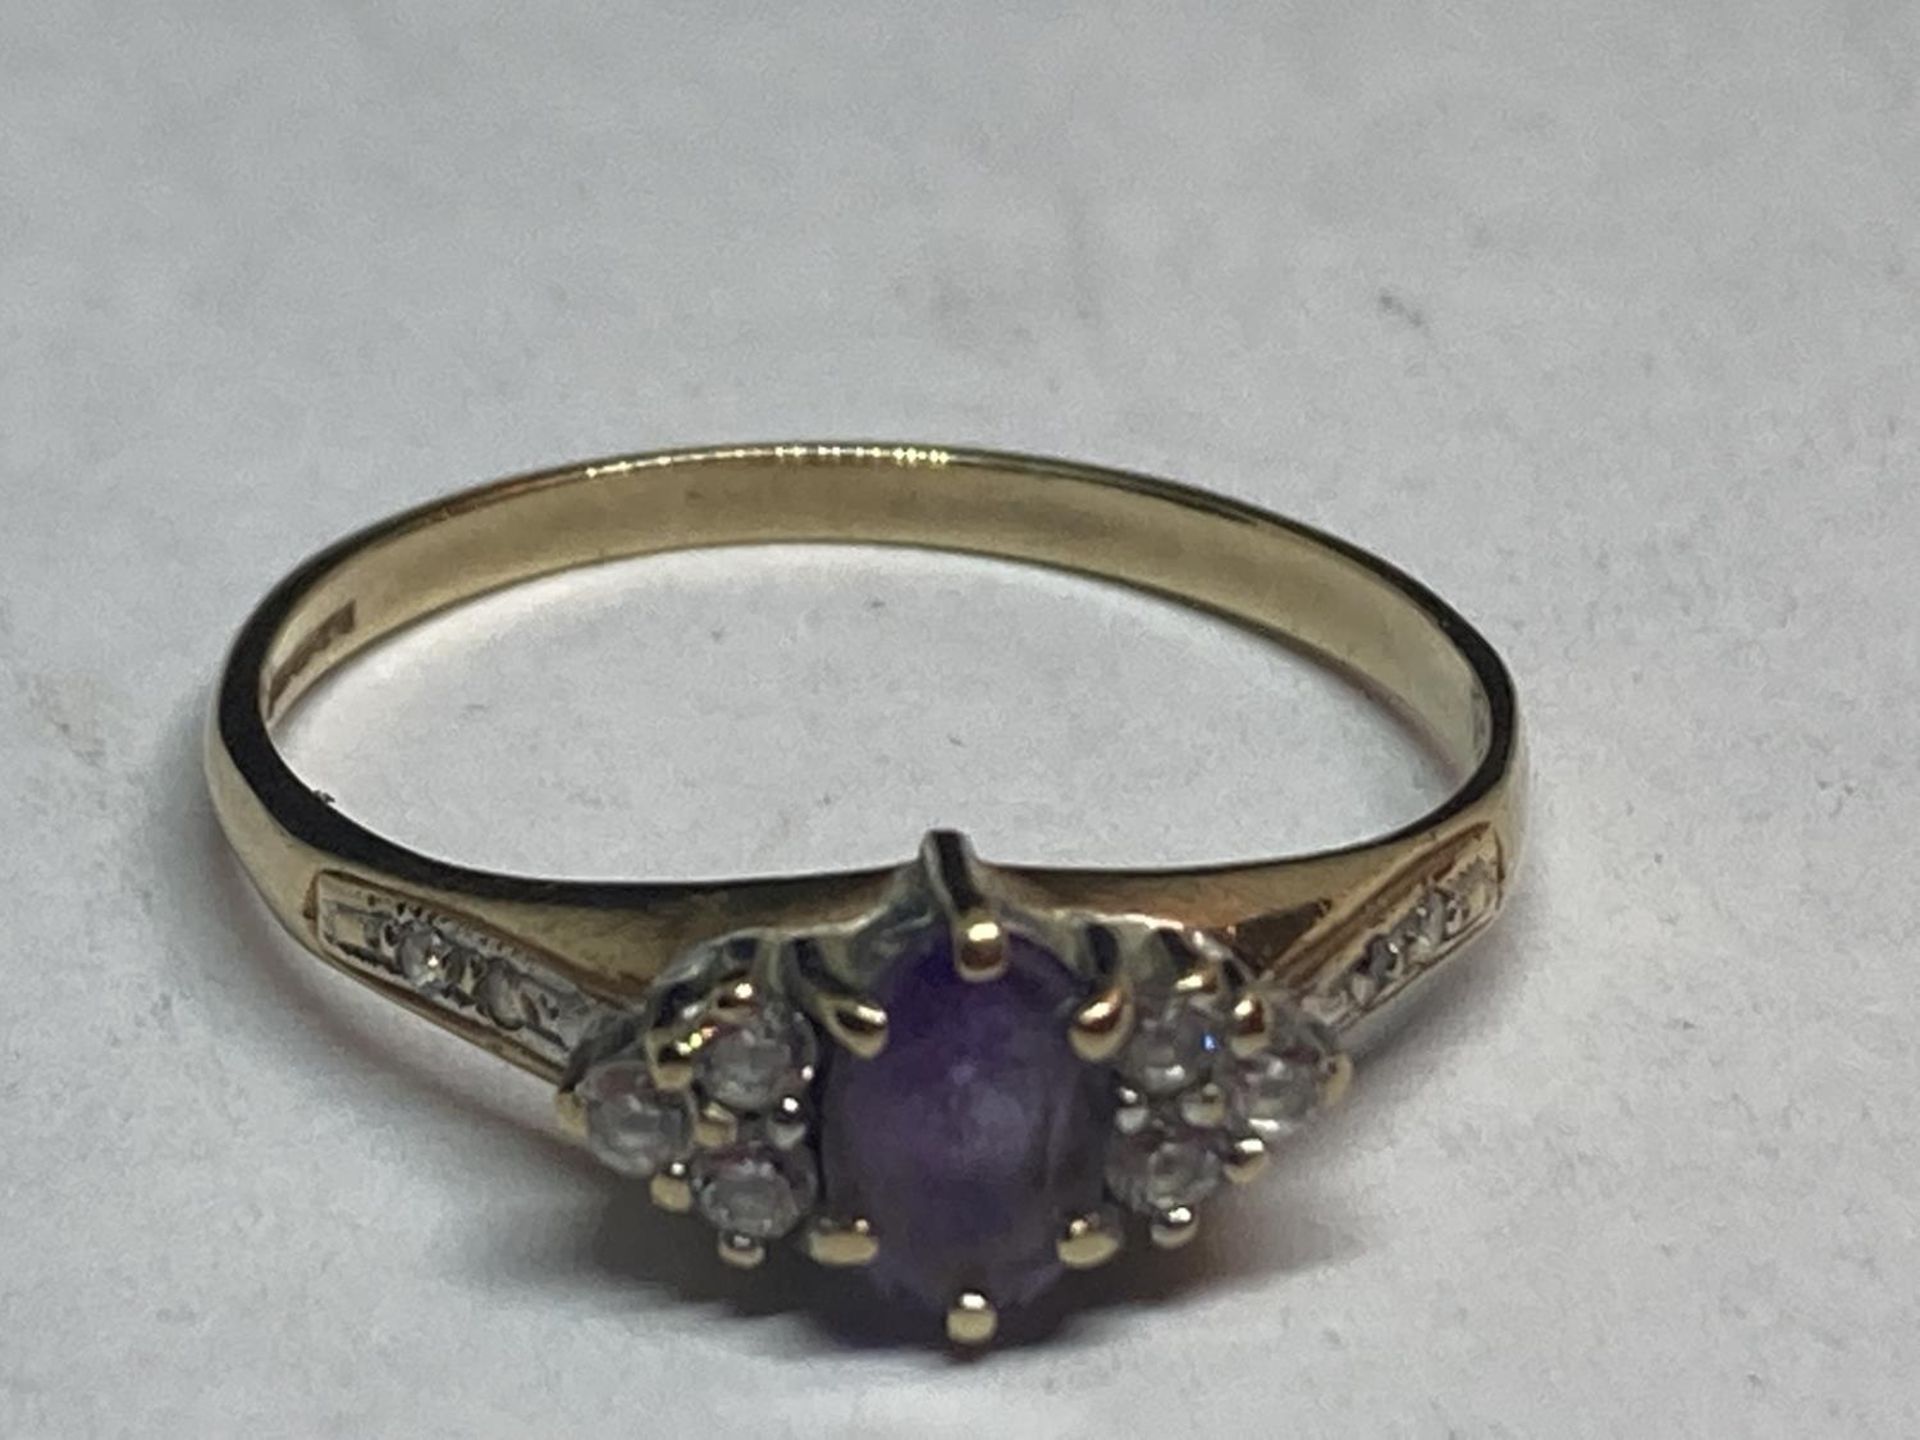 A 9 CARAT GOLD RING WITH A CENTRE AMETHYST SURROUNDED BY CUBIC ZIRCONIAS SIZE Q/R